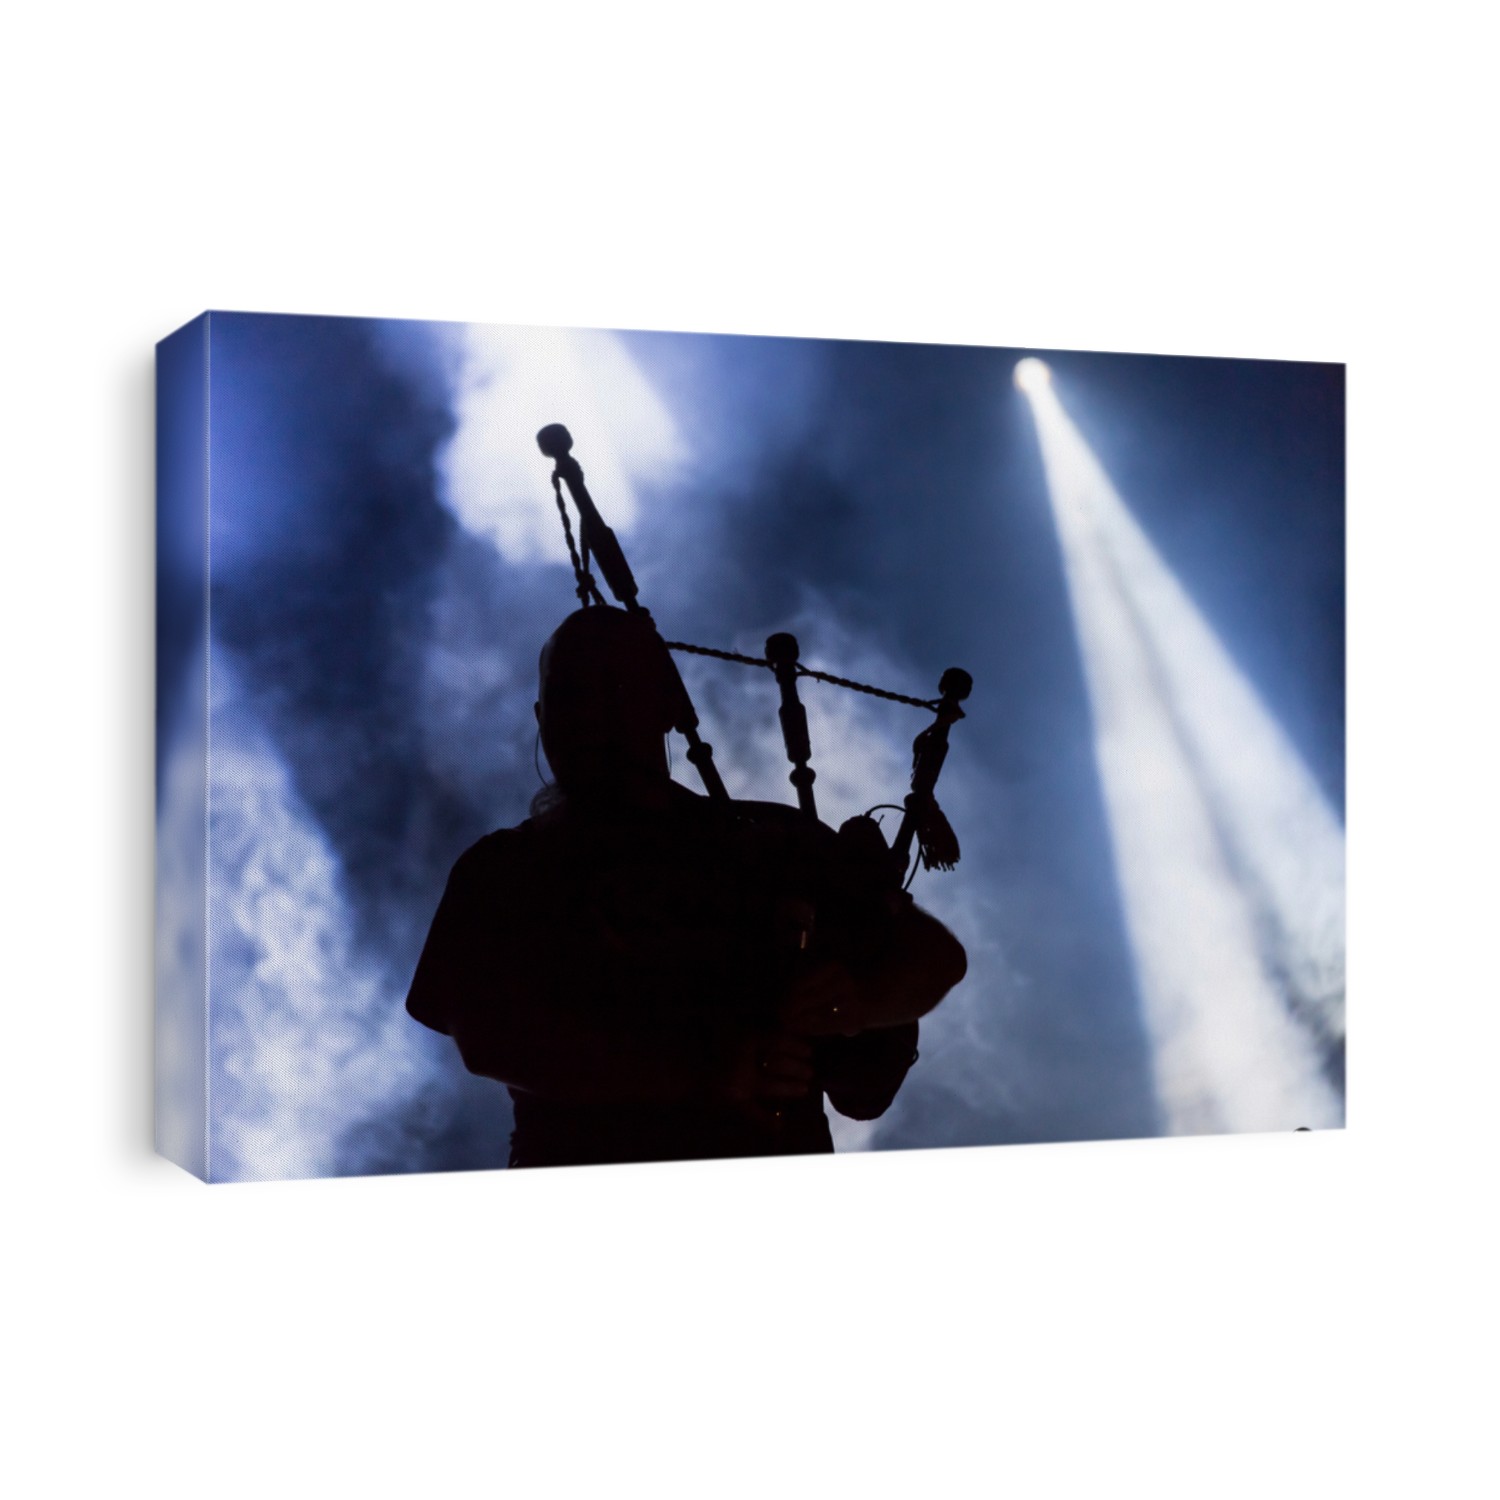 Bagpipe Silhouette concert